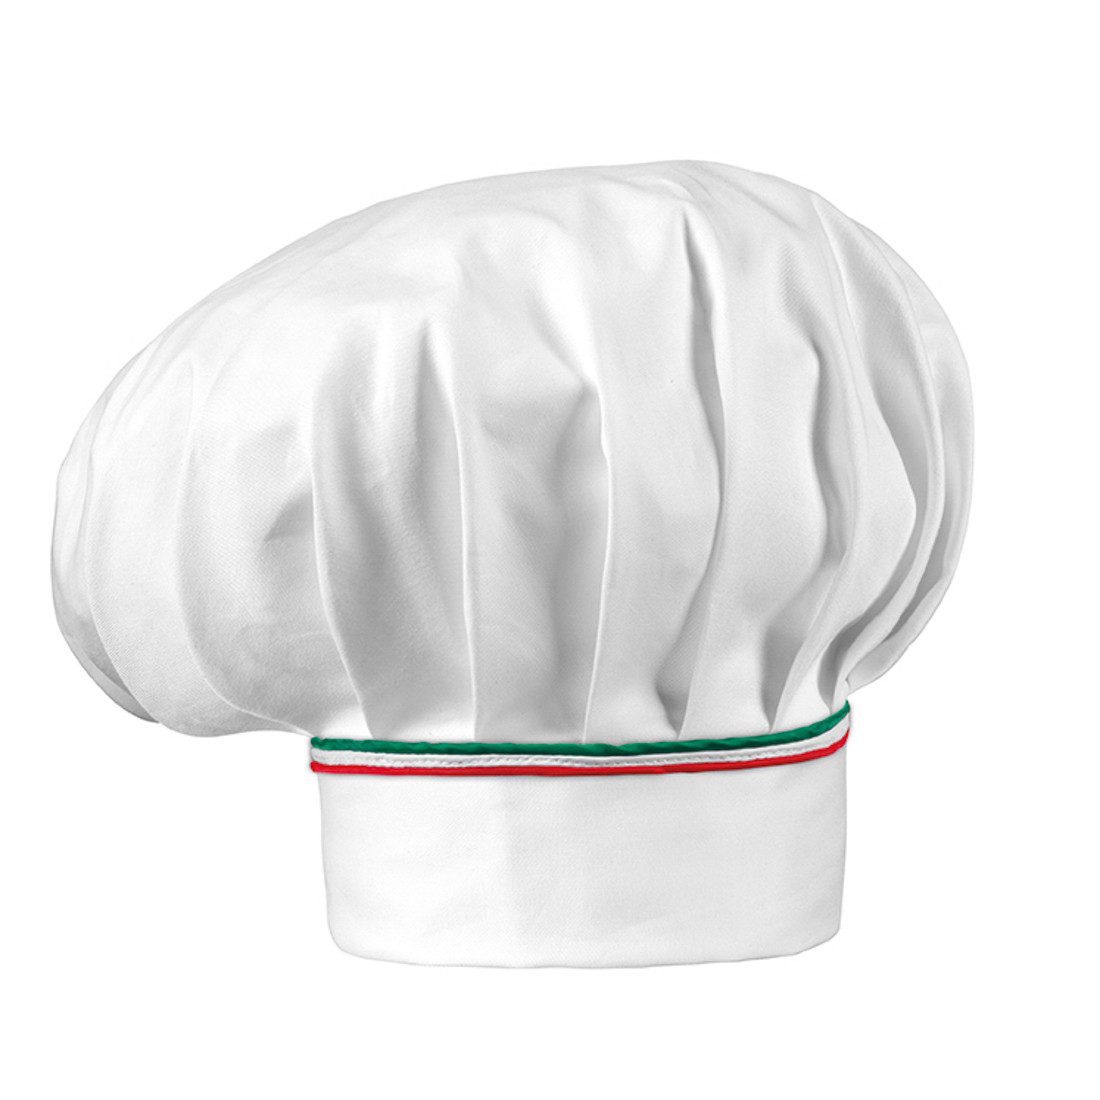 Chef's cap with contrasting details - Safetywear